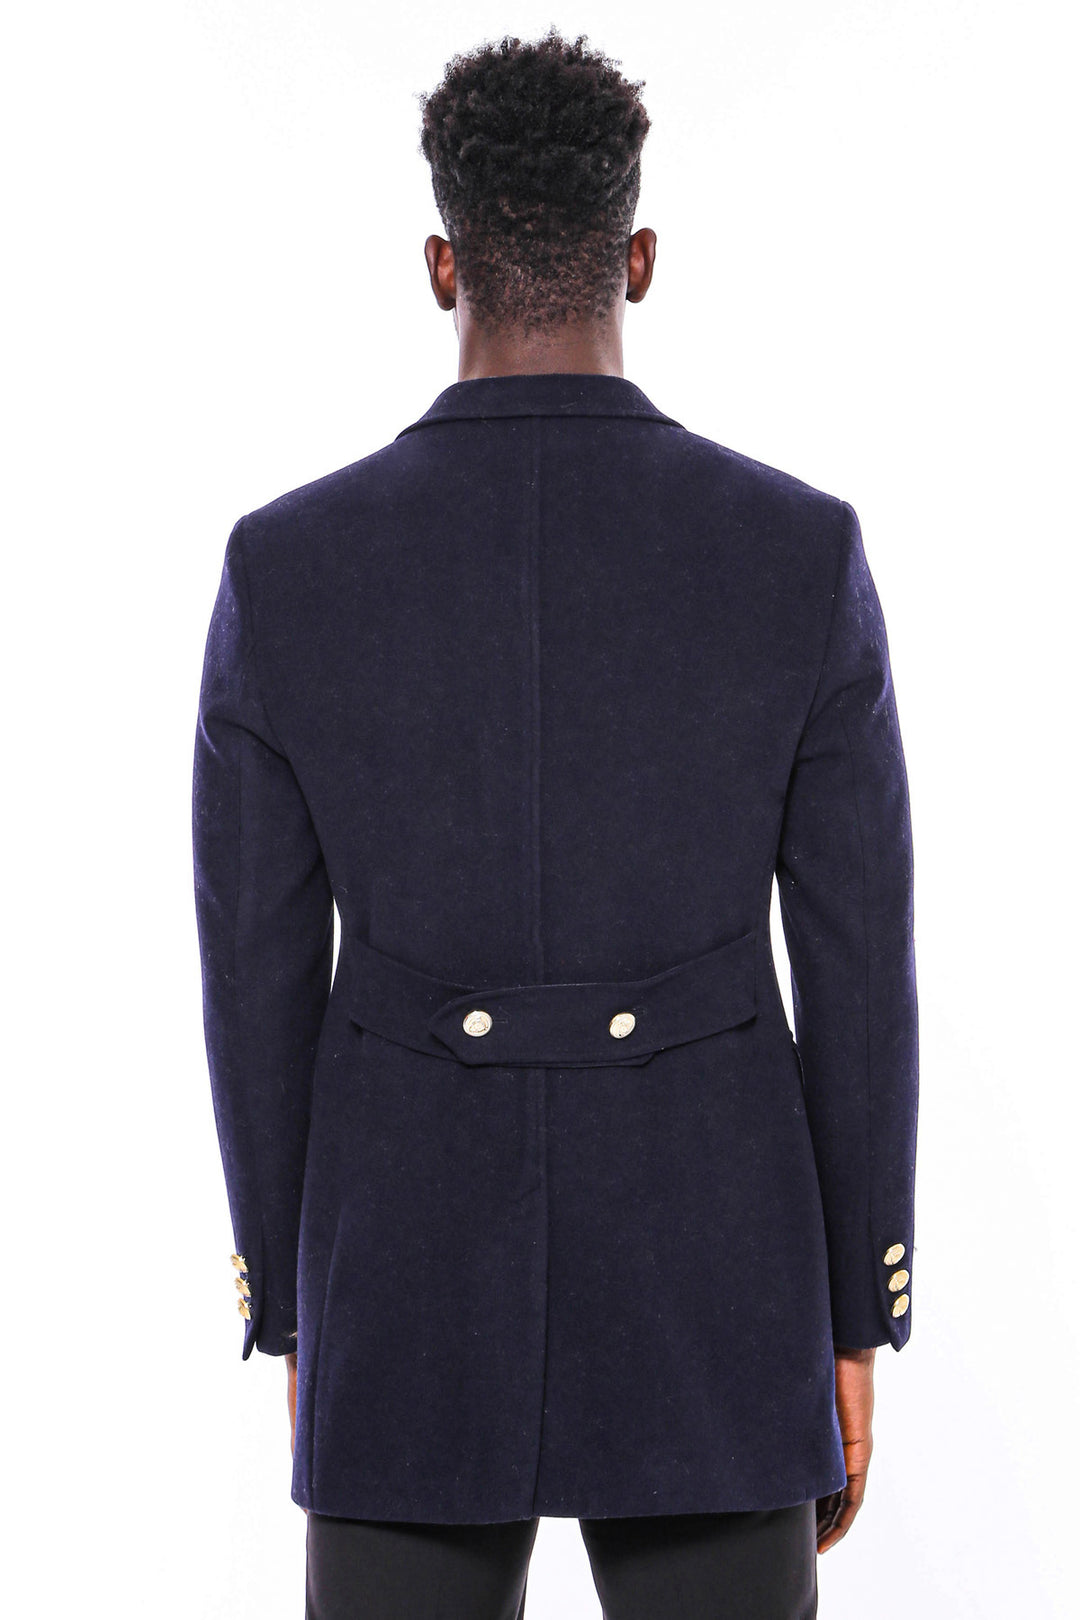 Navy Blue Metal Buttoned Double Breasted Long Coat - Wessi